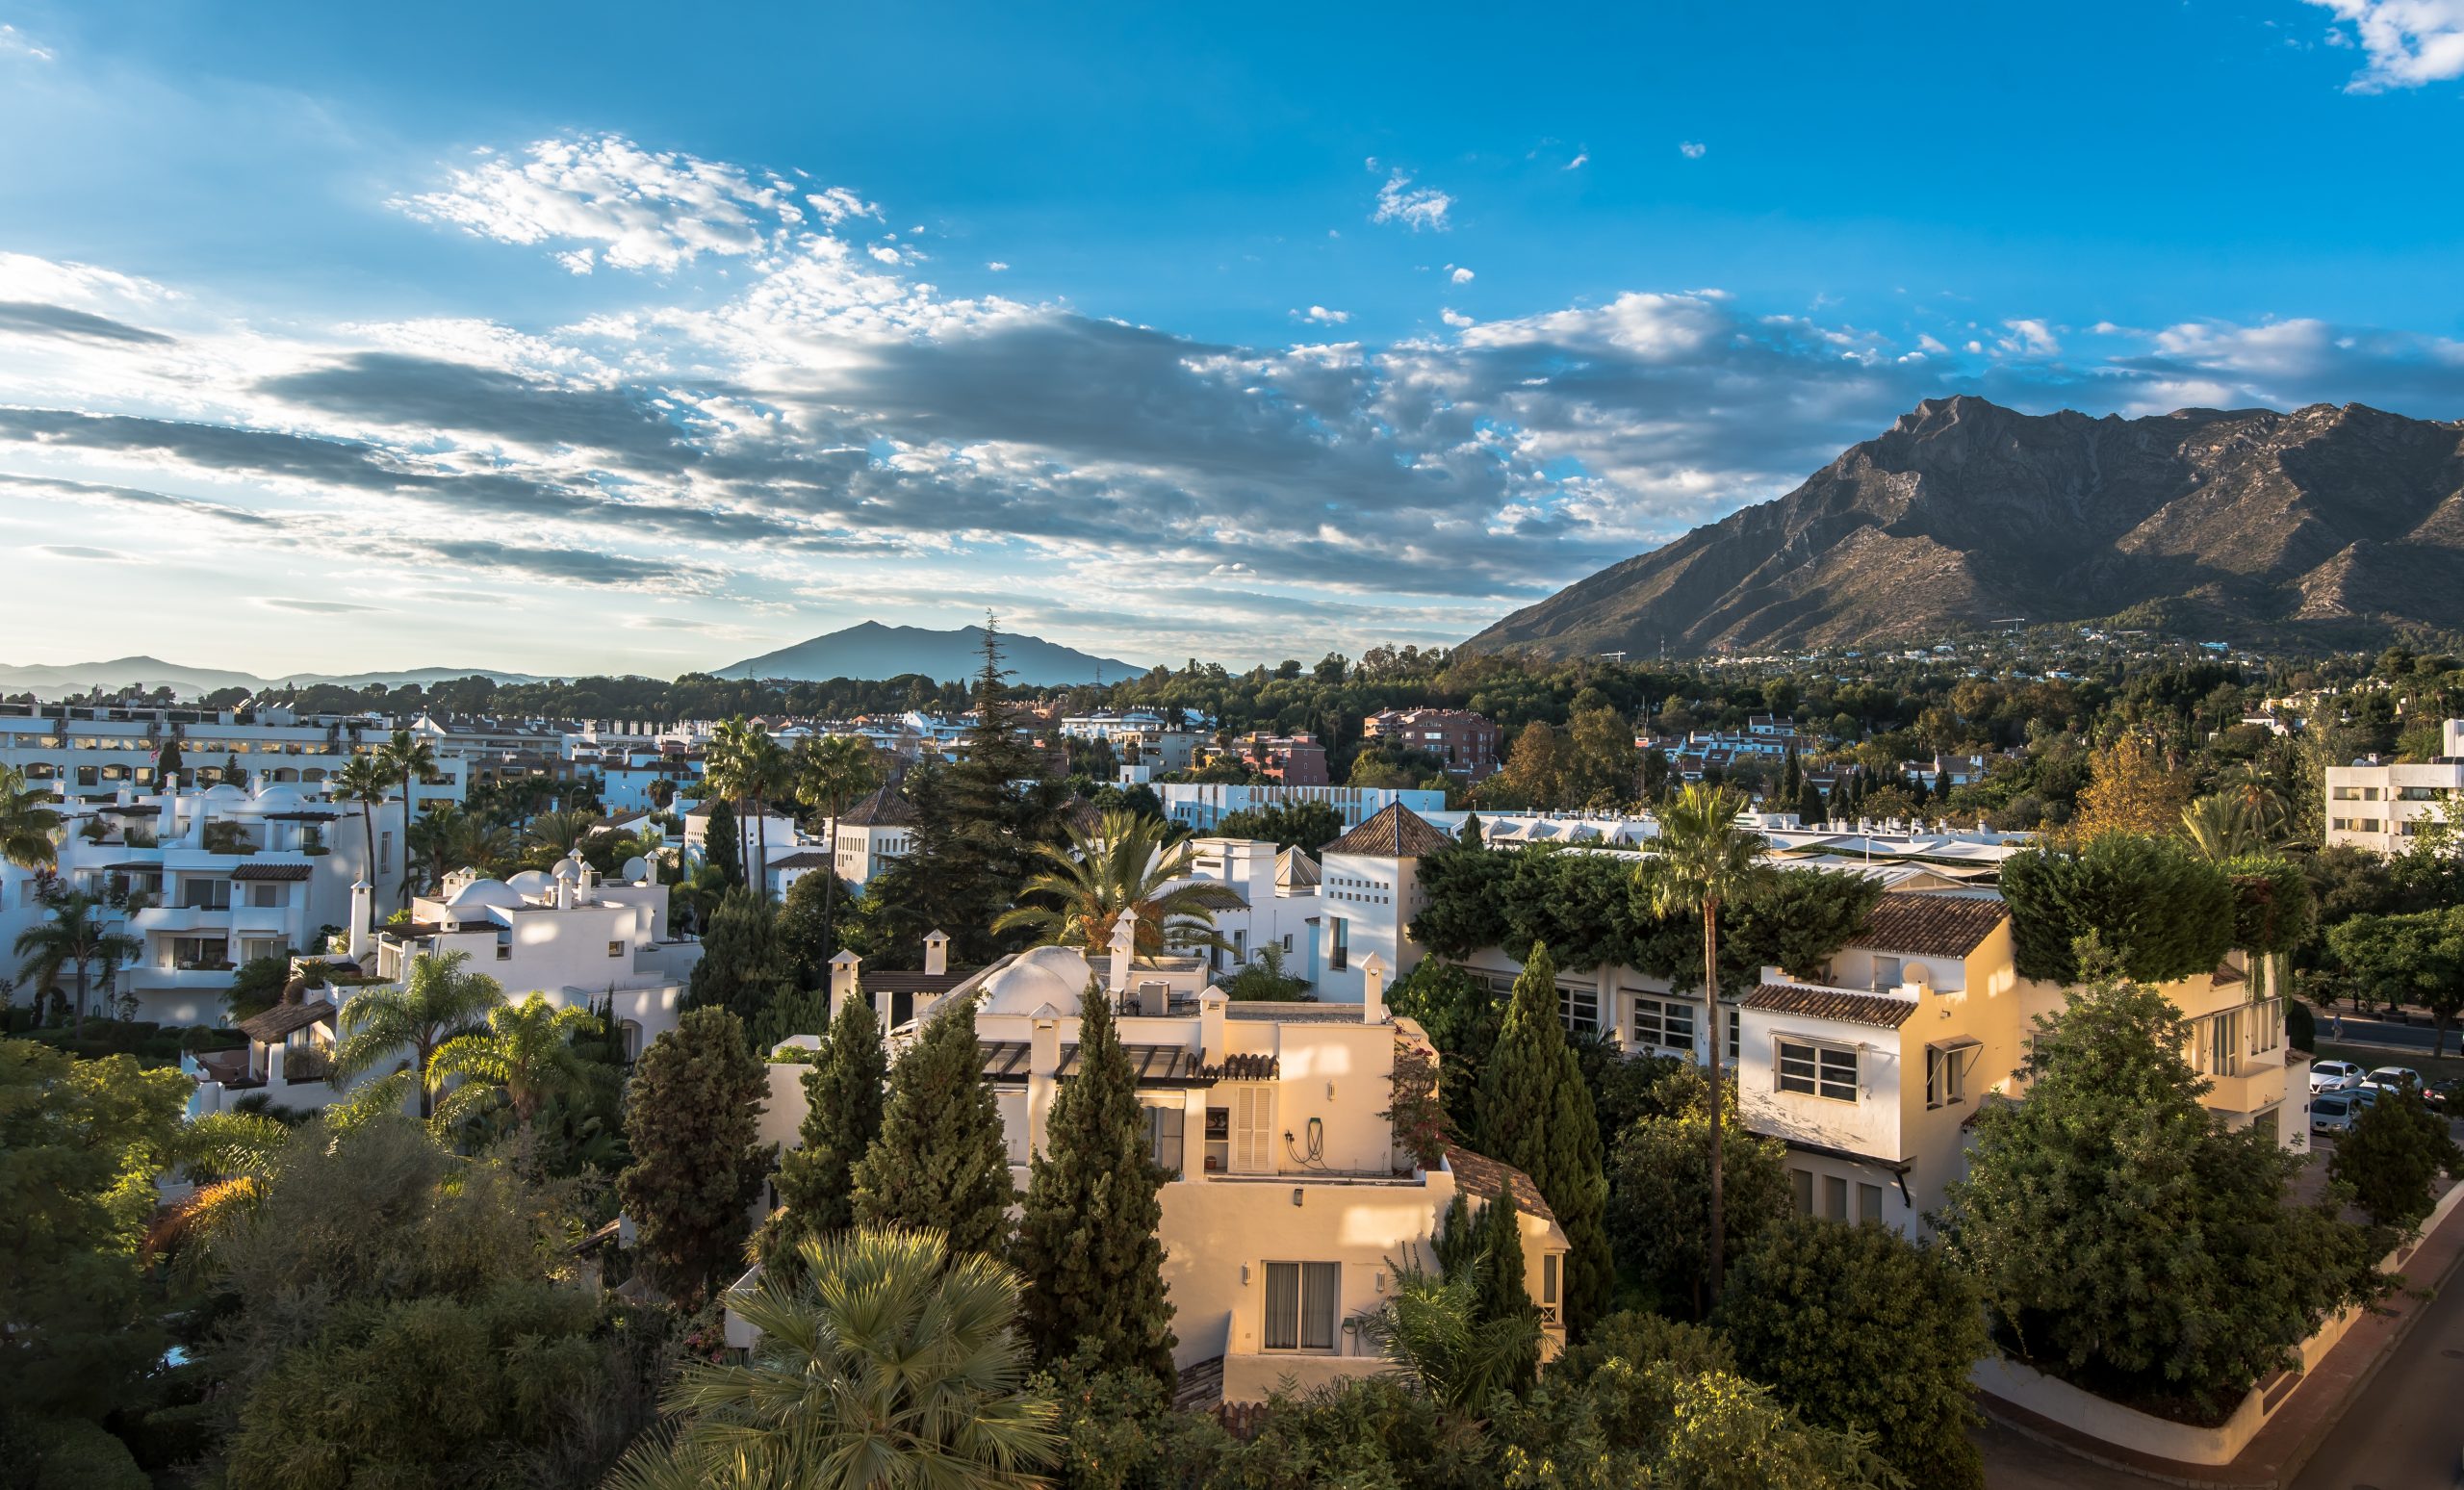 You are currently viewing Marbella, Costa del Sol: 10 Things To Know for Your Trip